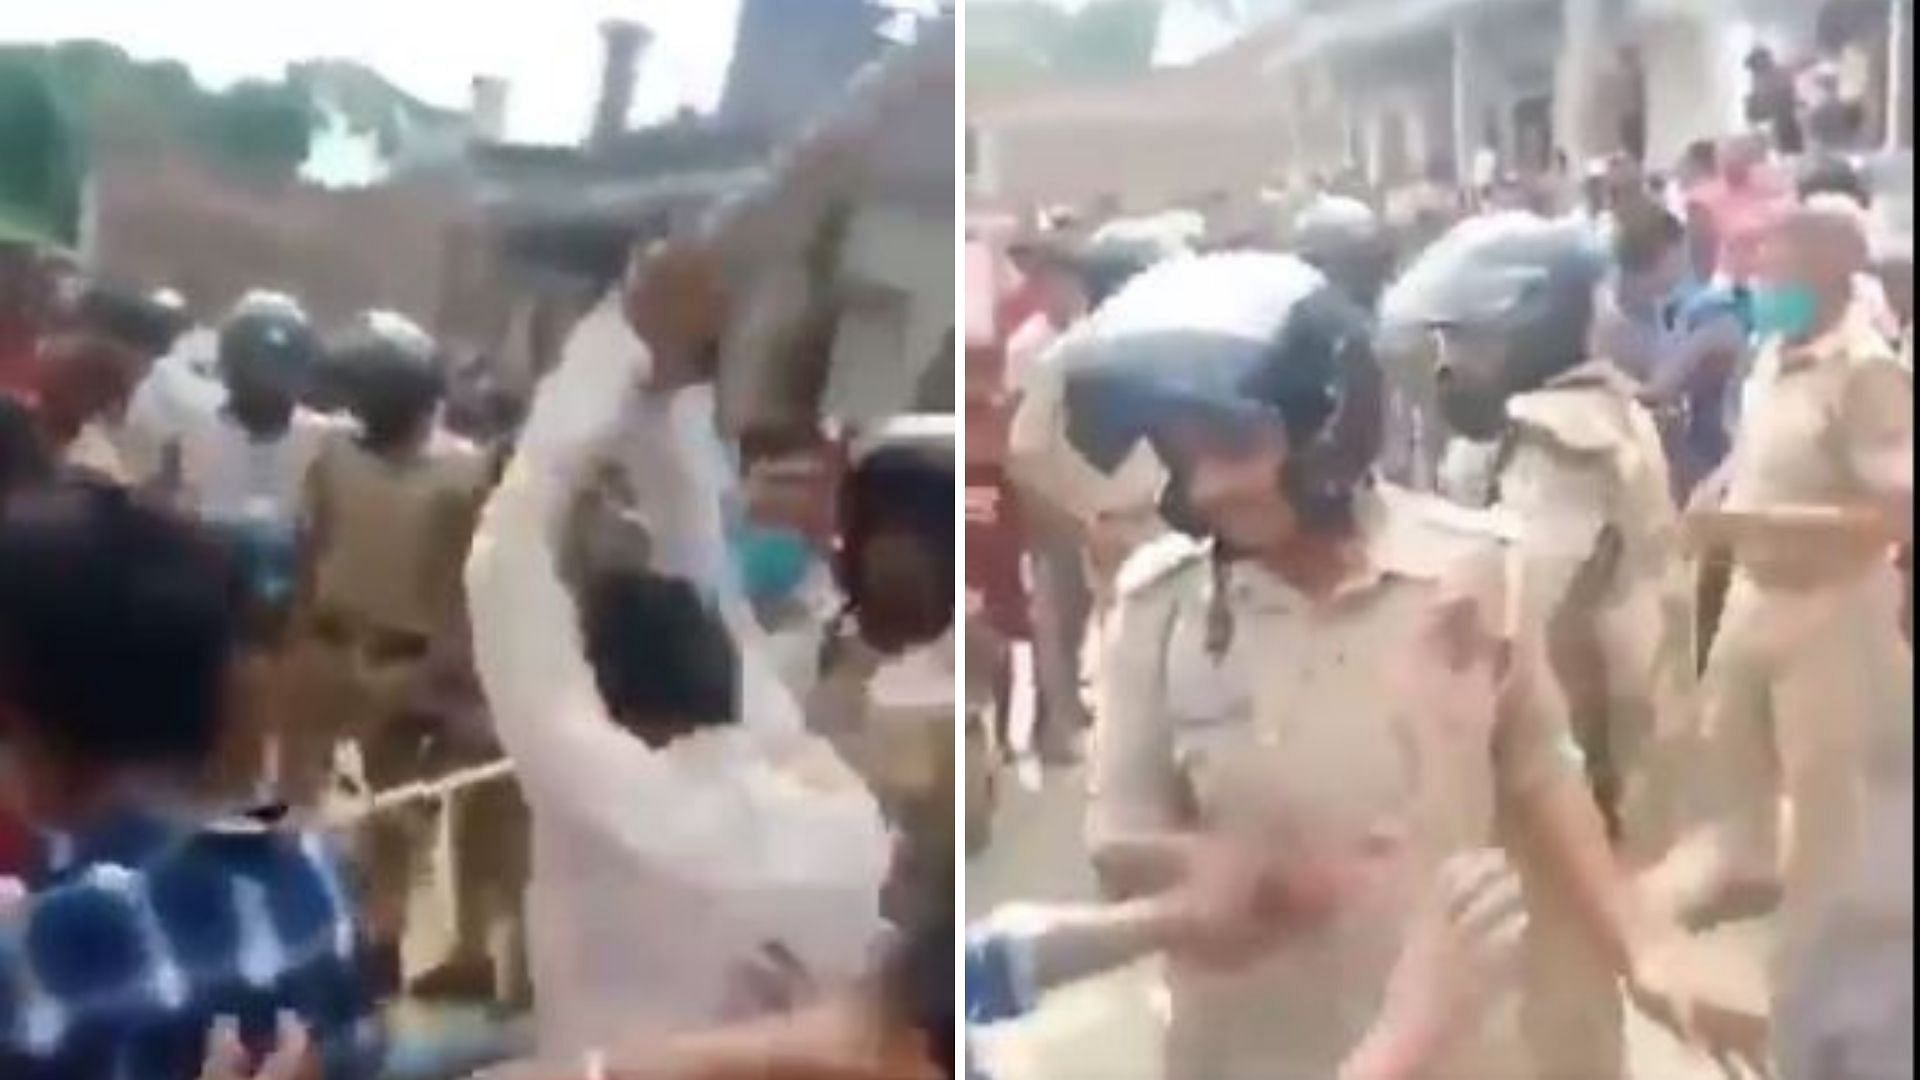 A man was lynched by an angry mob in Uttar Pradesh’s Kushinagar district after he allegedly killed a local teacher in his house on Monday, 7 September.